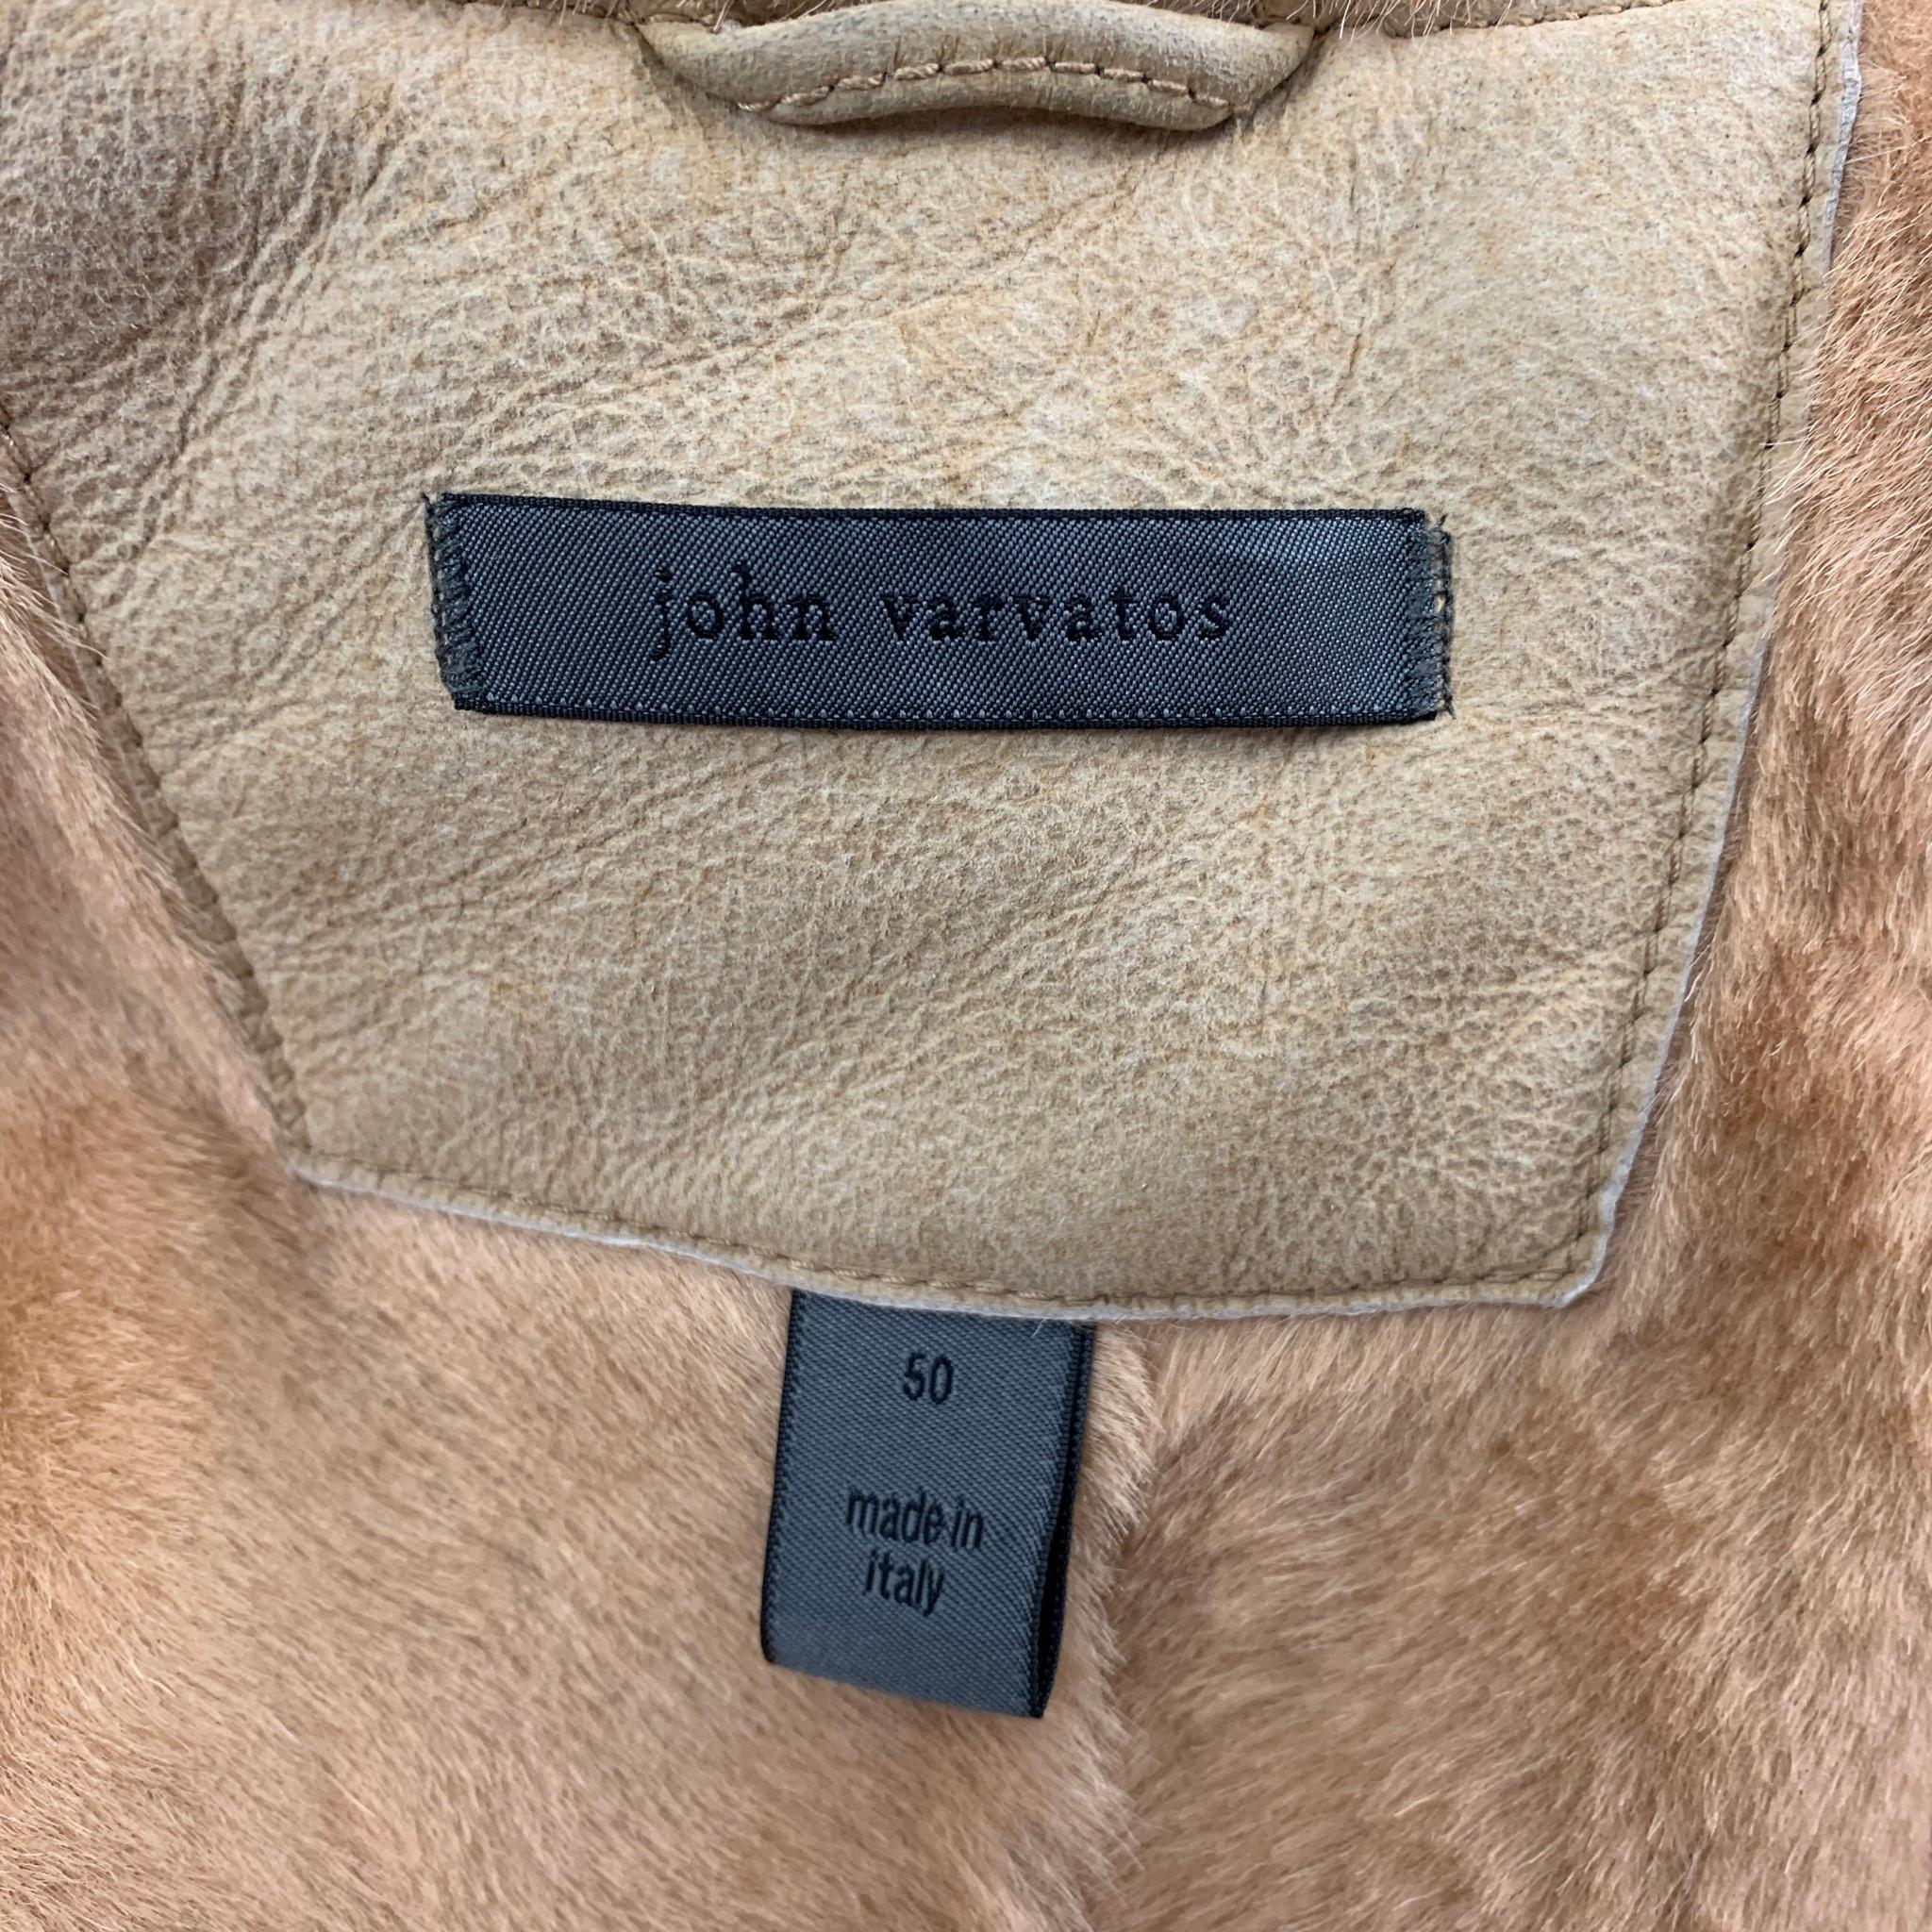 JOHN VARVATOS coat comes in a beige shearling with a fur liner featuring a spread collar, flap pockets, and a buttoned closure. Made in Italy.

Very Good Pre-Owned Condition.
Marked: 50

Measurements:

Shoulder: 20 in.
Chest: 46 in.
Sleeve: 26